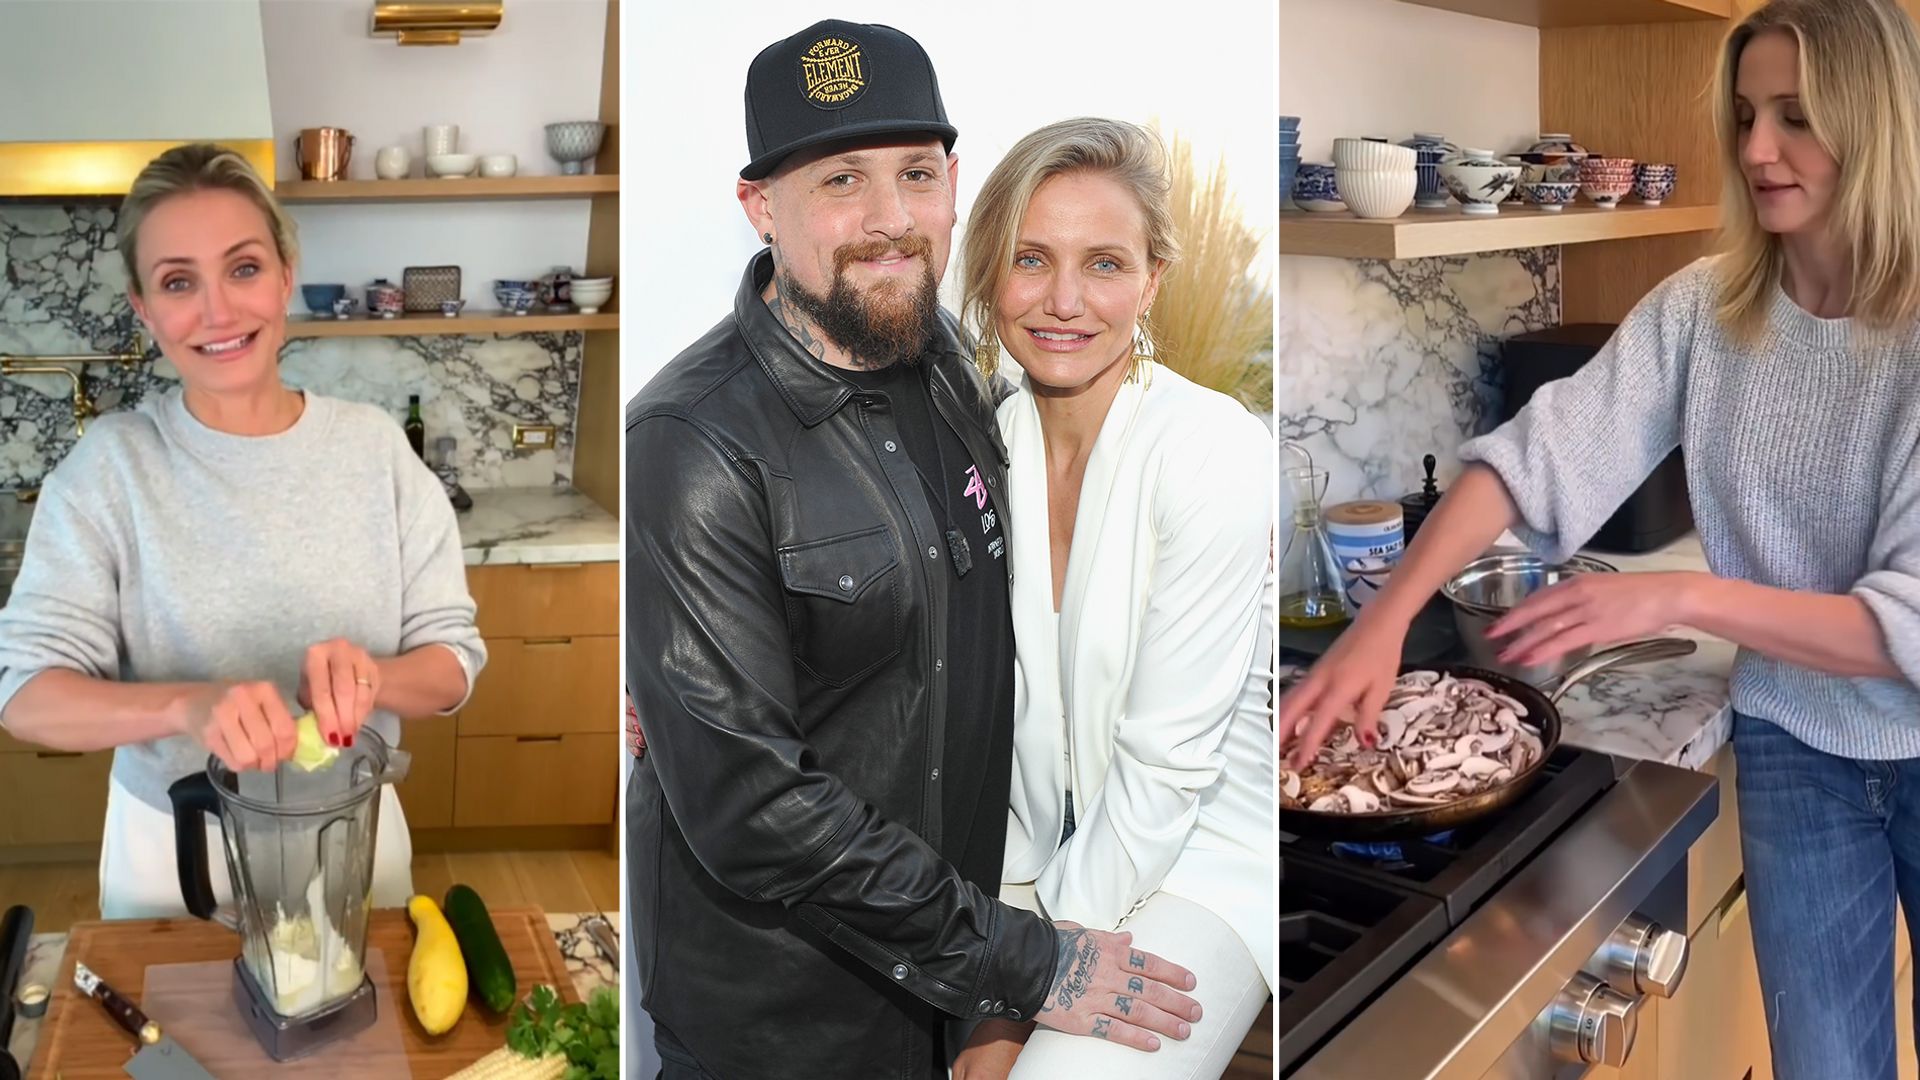 Cameron Diaz's chef-worthy kitchen at $12m home with Benji Madden for newborn baby